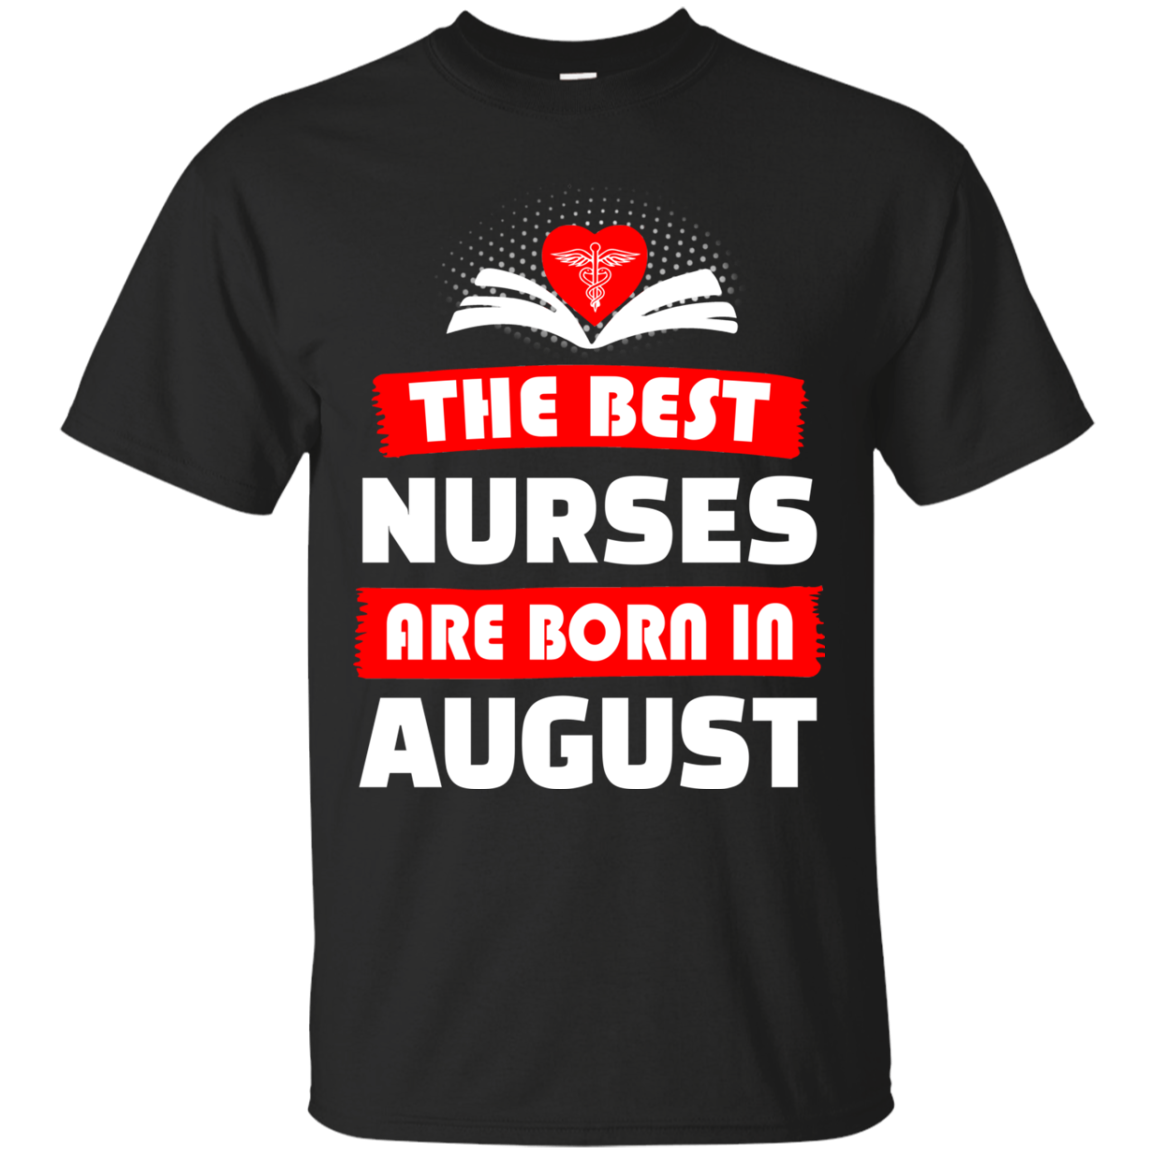 The best Nurses are born in August shirt, hoodie, tank